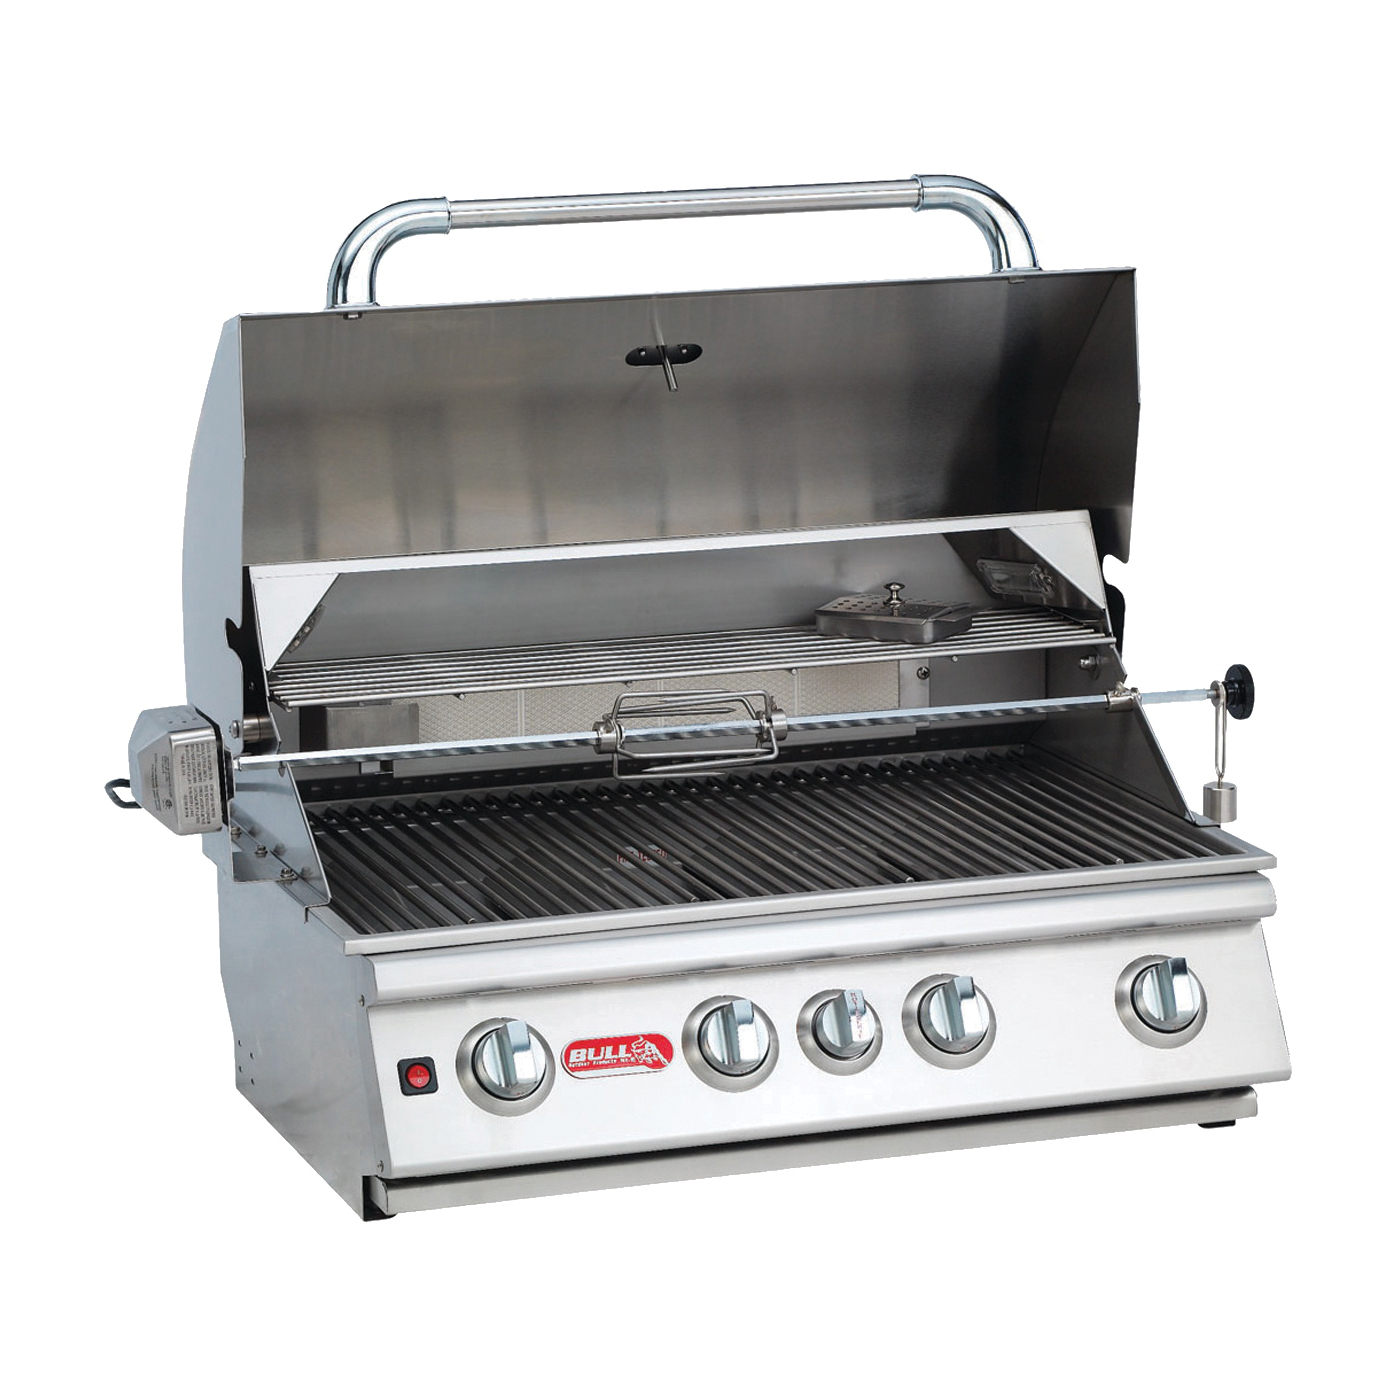 Angus 47629 Gas Grill Head, 75000 Btu, Natural Gas, 4-Burner, 210 sq-in Secondary Cooking Surface